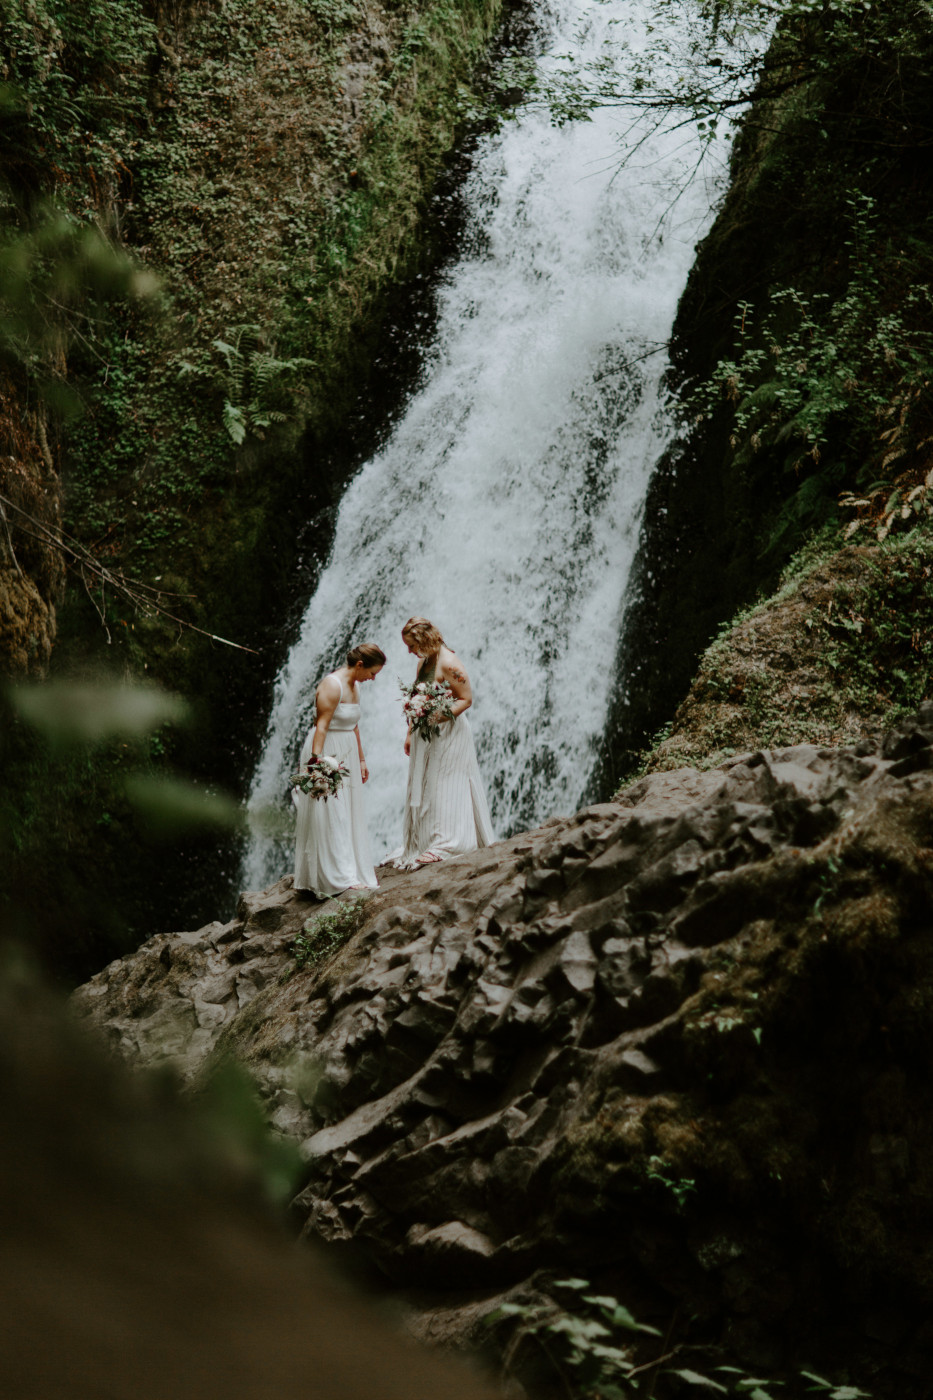 Audrey and Kate admire their dresses in front of Bridal Veil Falls. Elopement wedding photography at Bridal Veil Falls by Sienna Plus Josh.